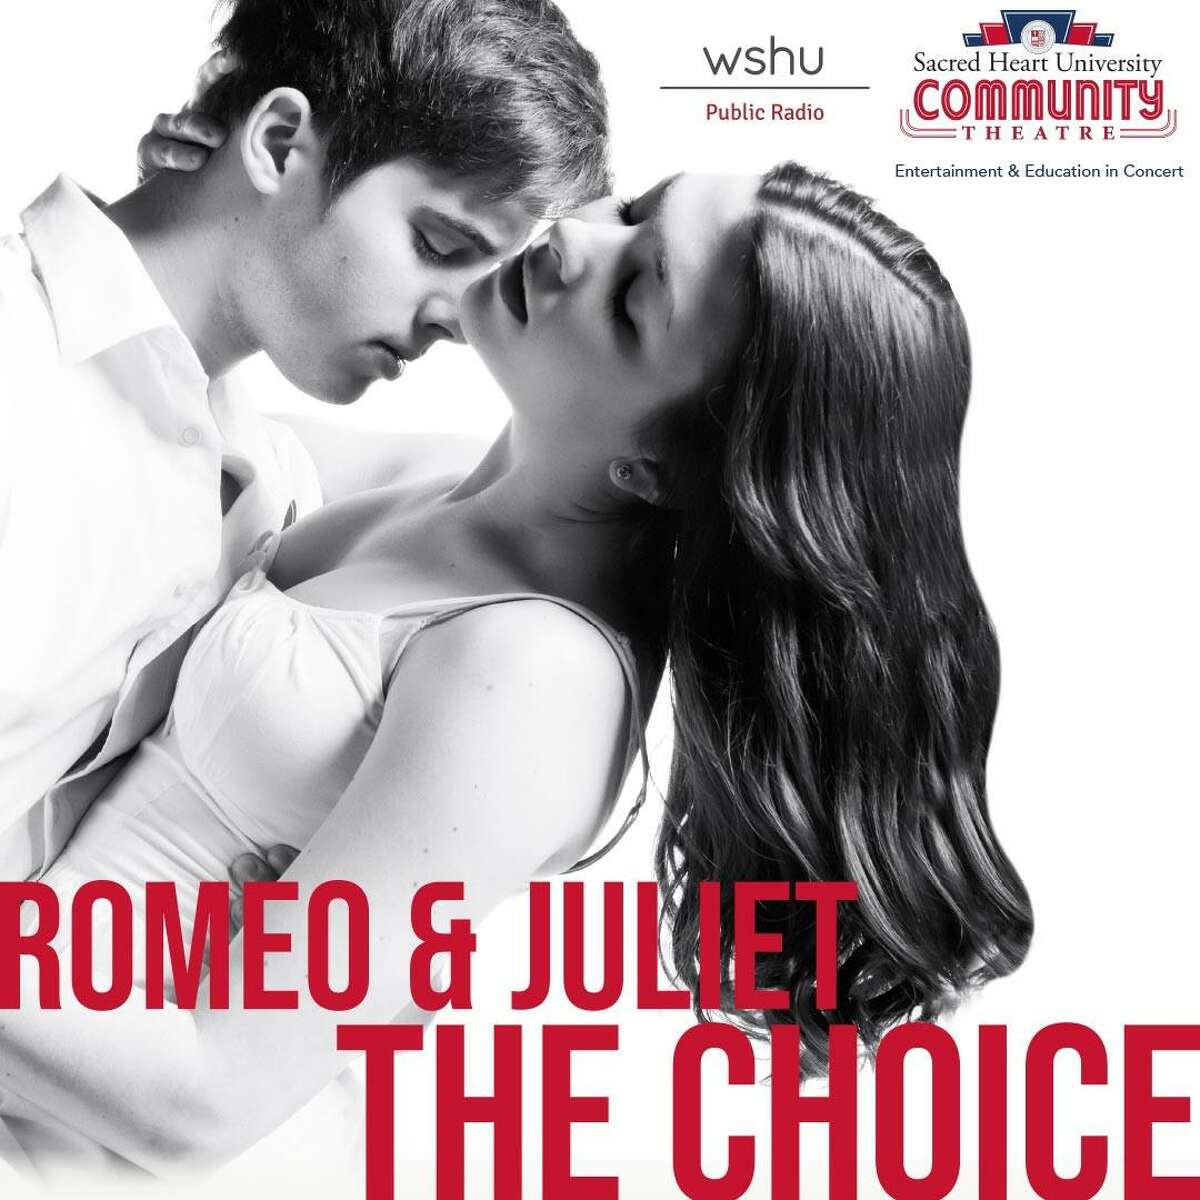 “Romeo and Juliet — The Choice” will be performed at the Sacred Heart University Community Theatre April 8 and 9.